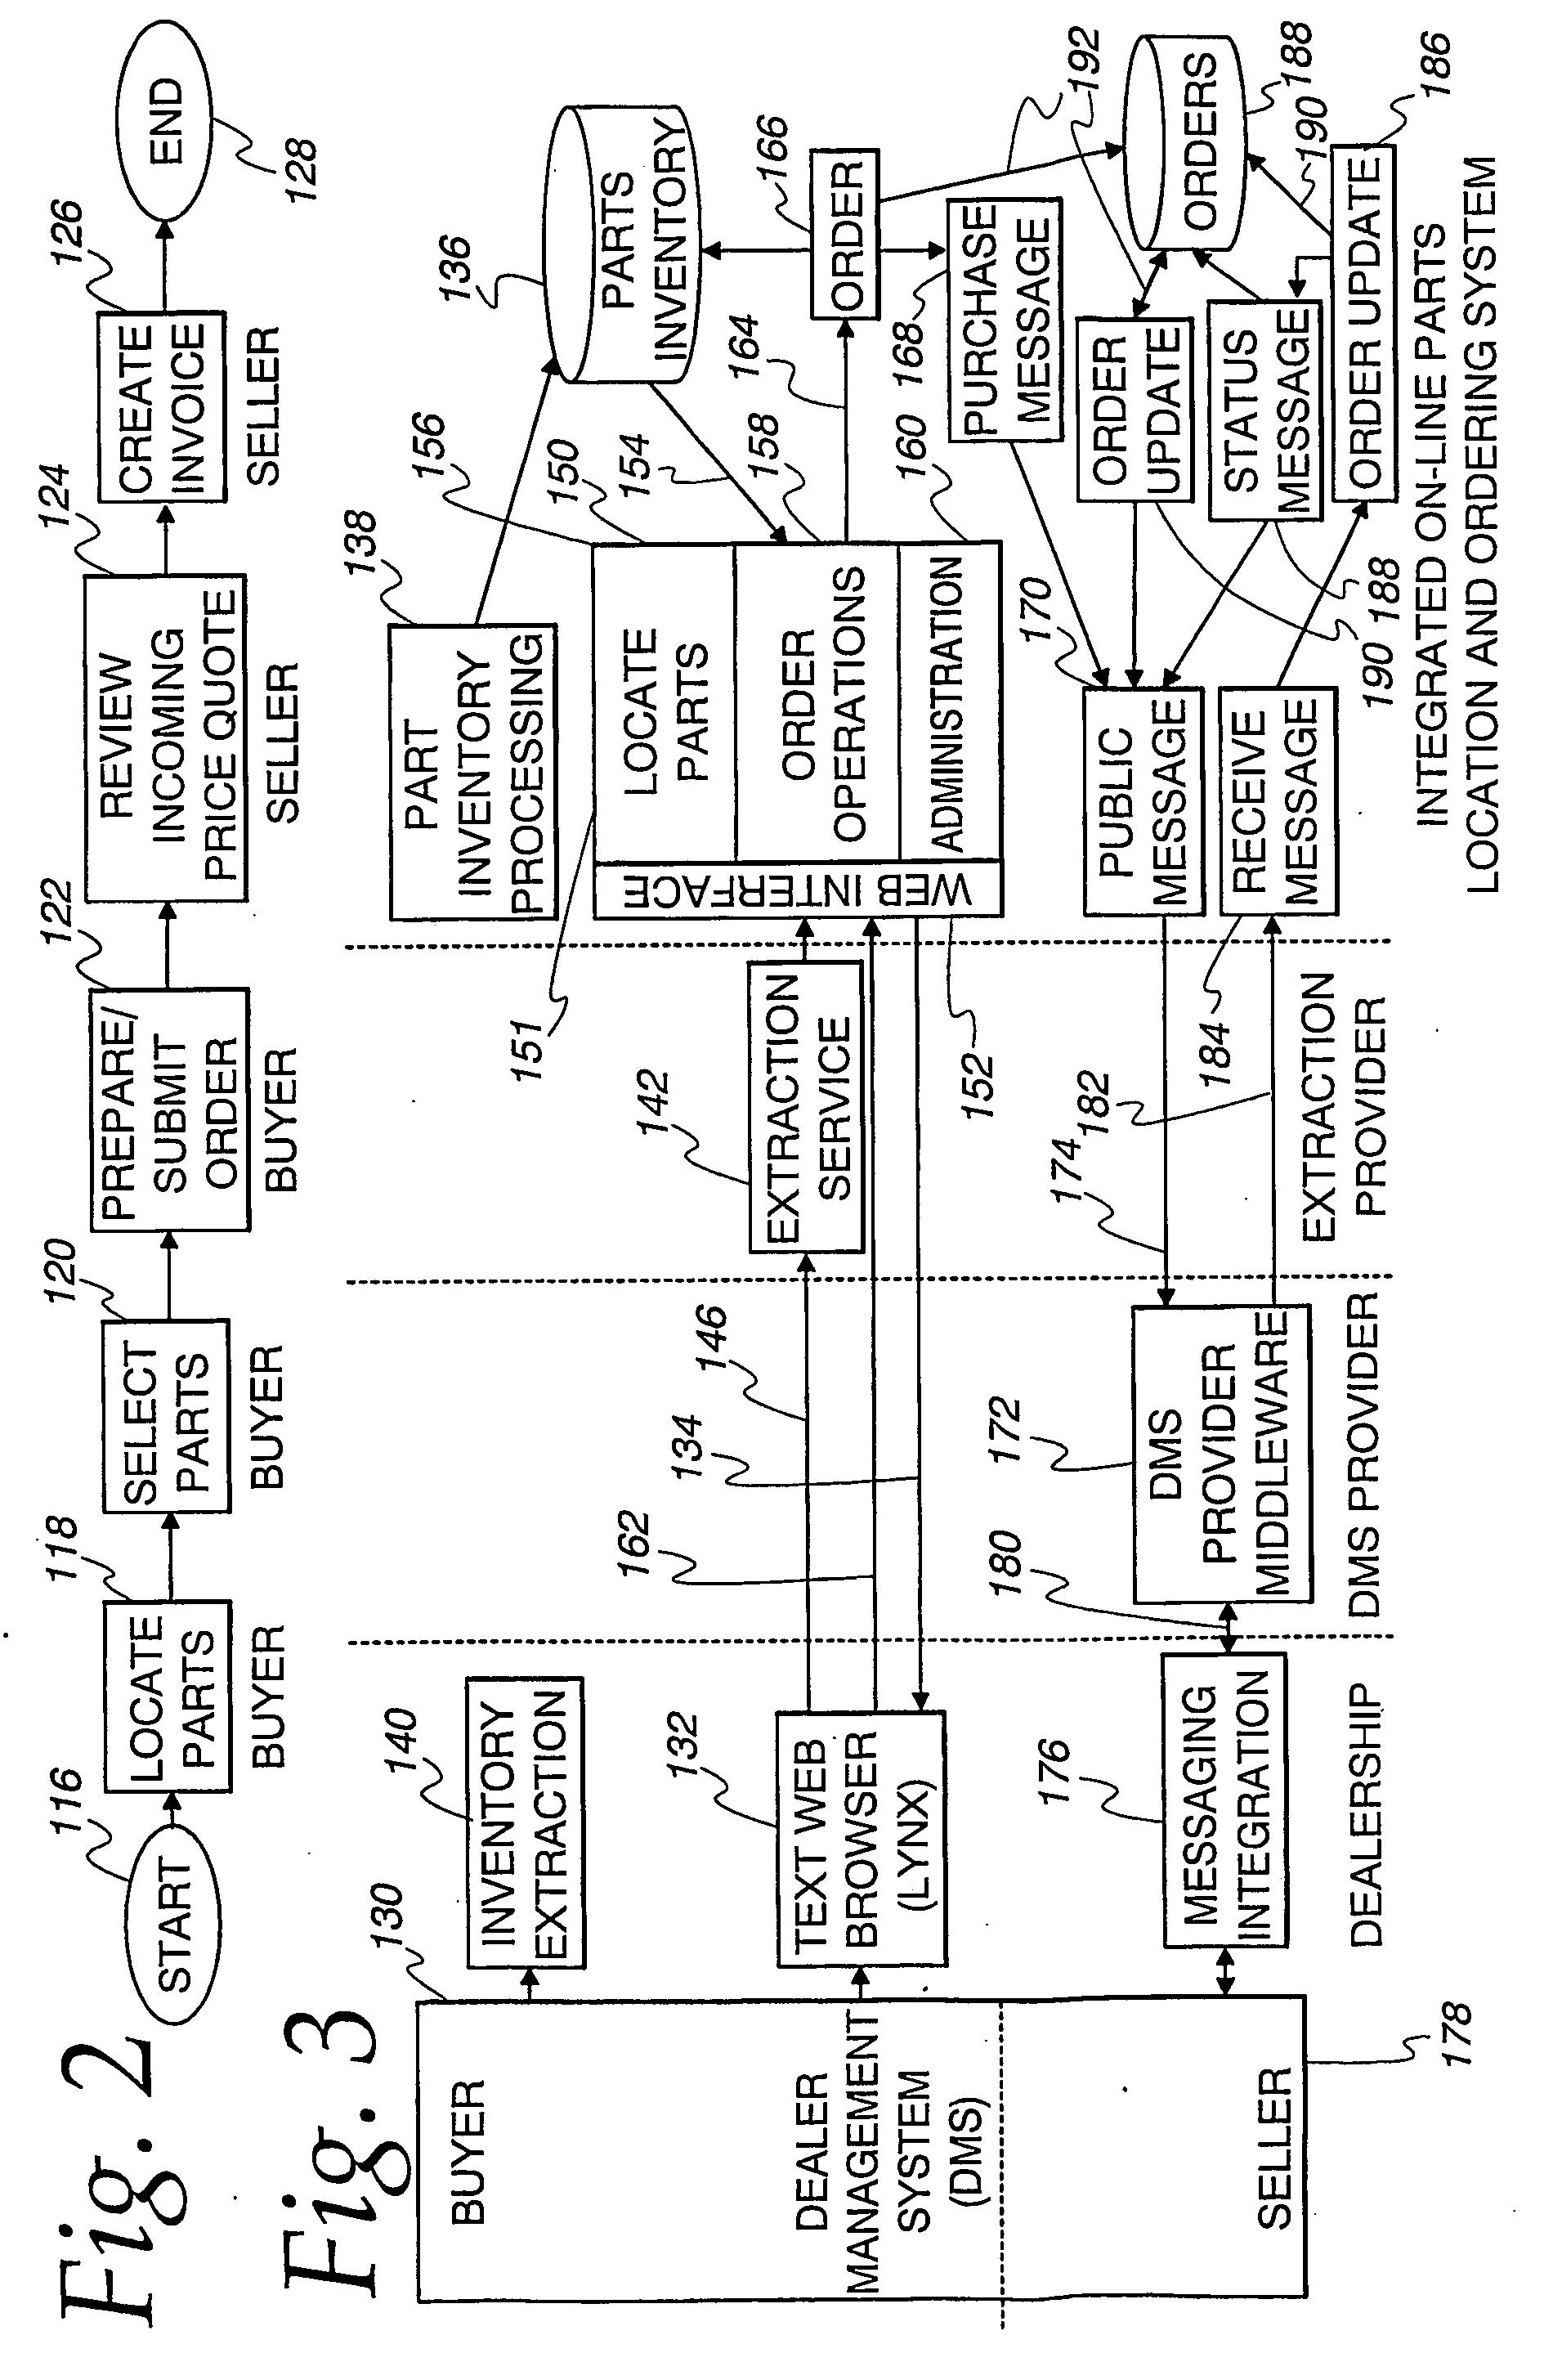 On-line parts location and transaction system